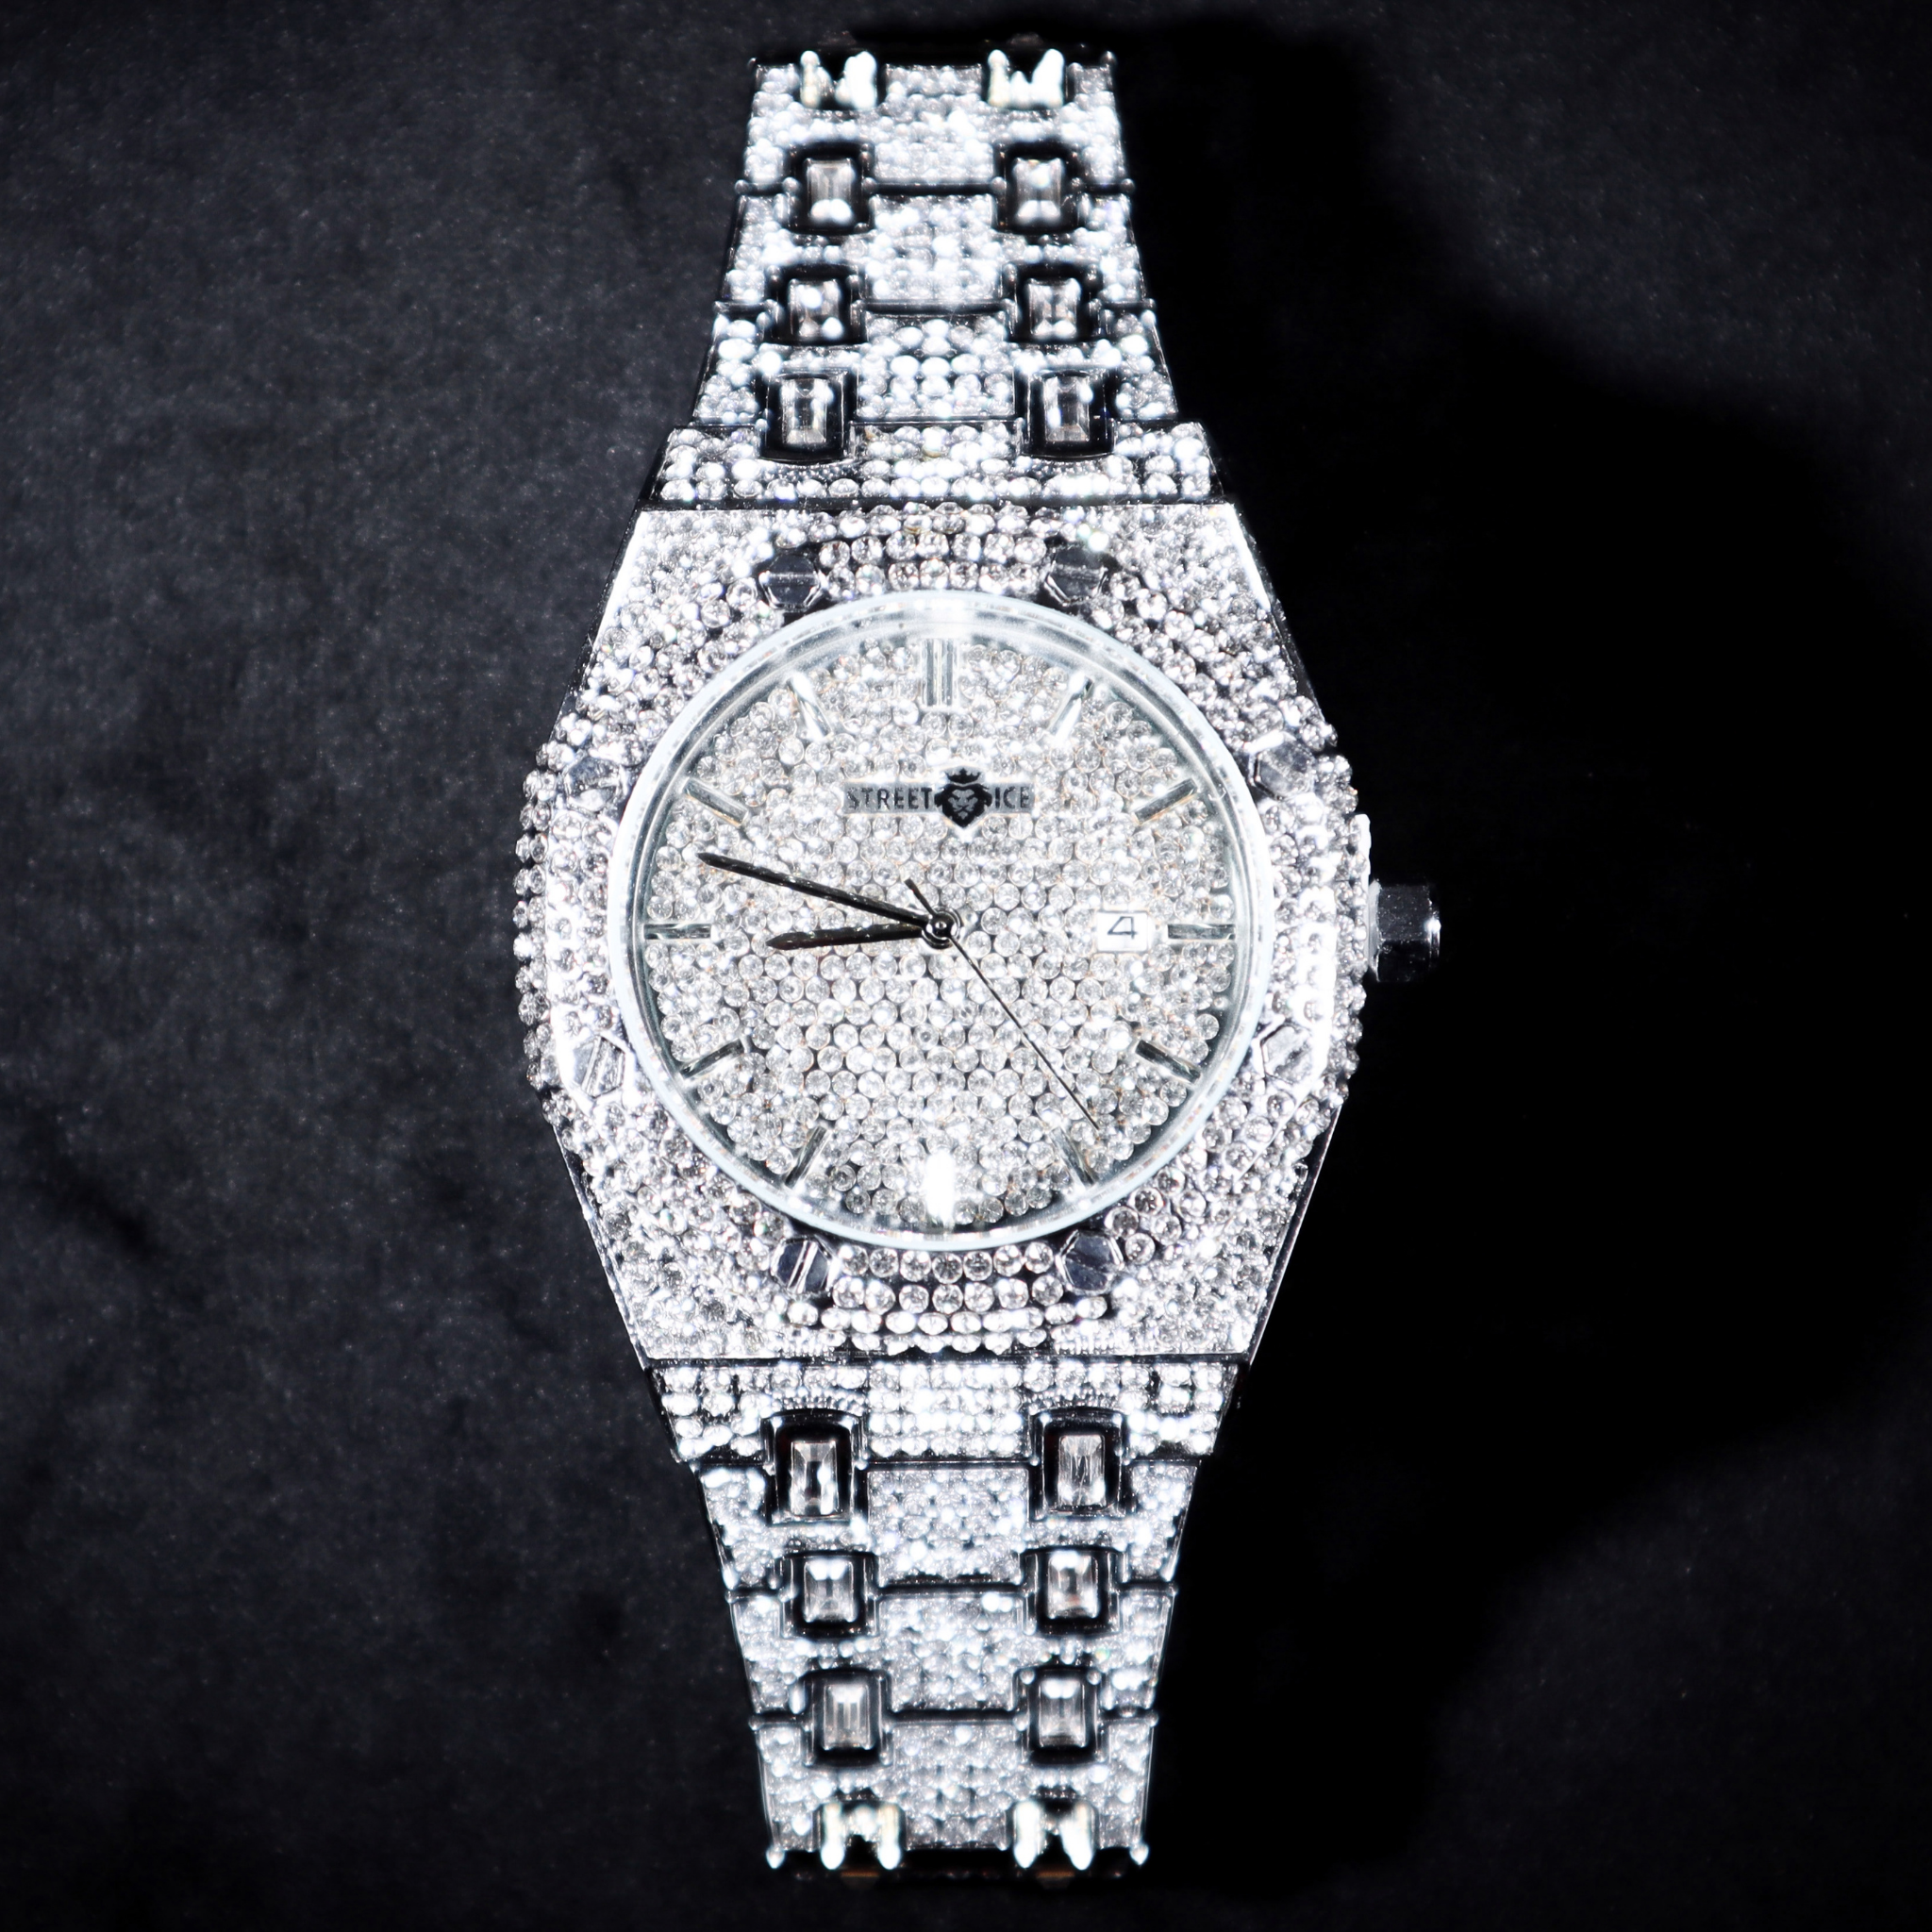 NEW Iced Classic Watch - Streetice